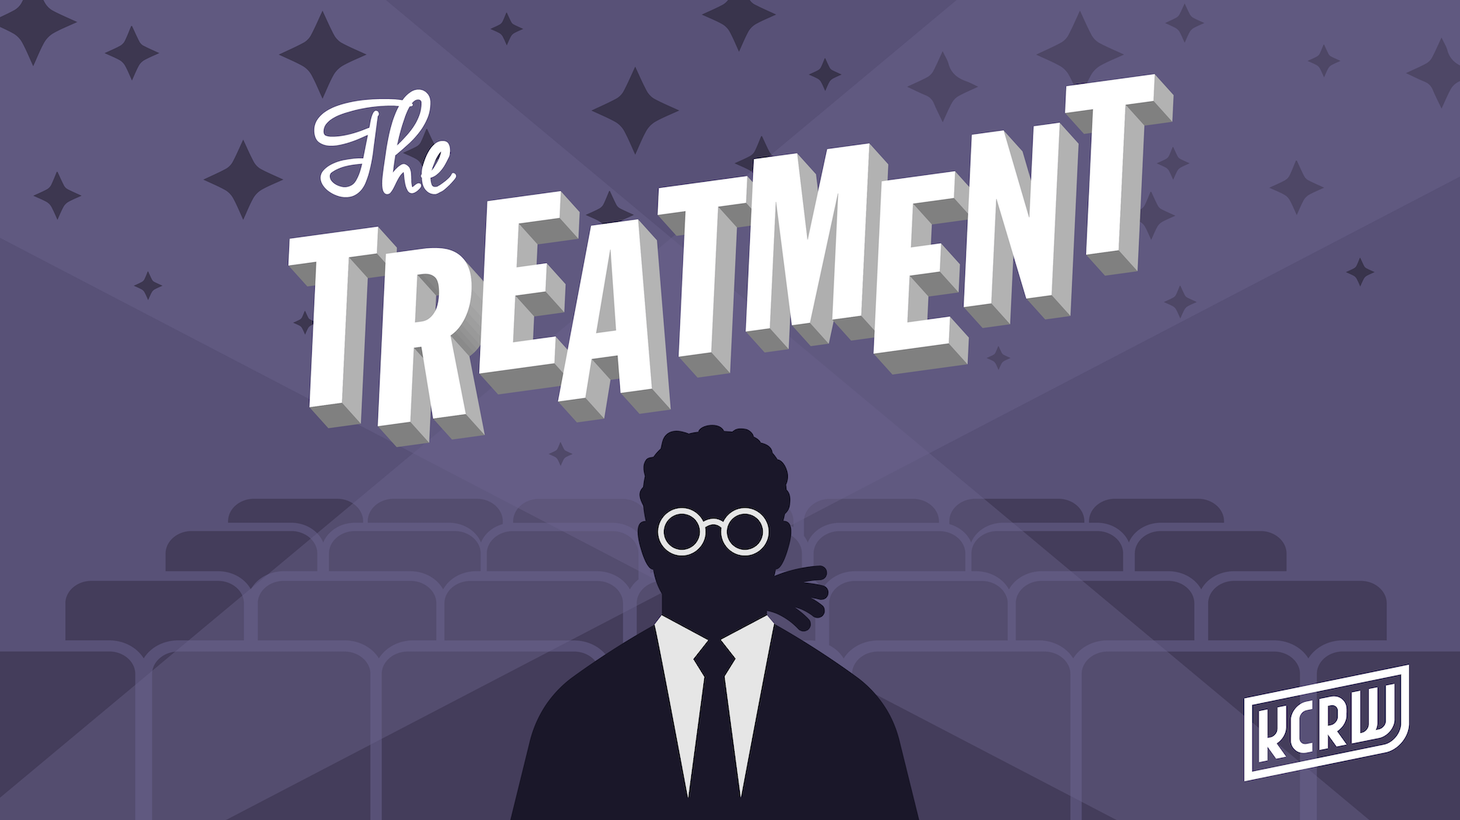 Television month continues on The Treatment, aS Elvis Mitchell hosts Ilene Chaiken, creator and executive producer of The L Word, Showtime's dramatic series about the lives of lesbians in Los Angeles.